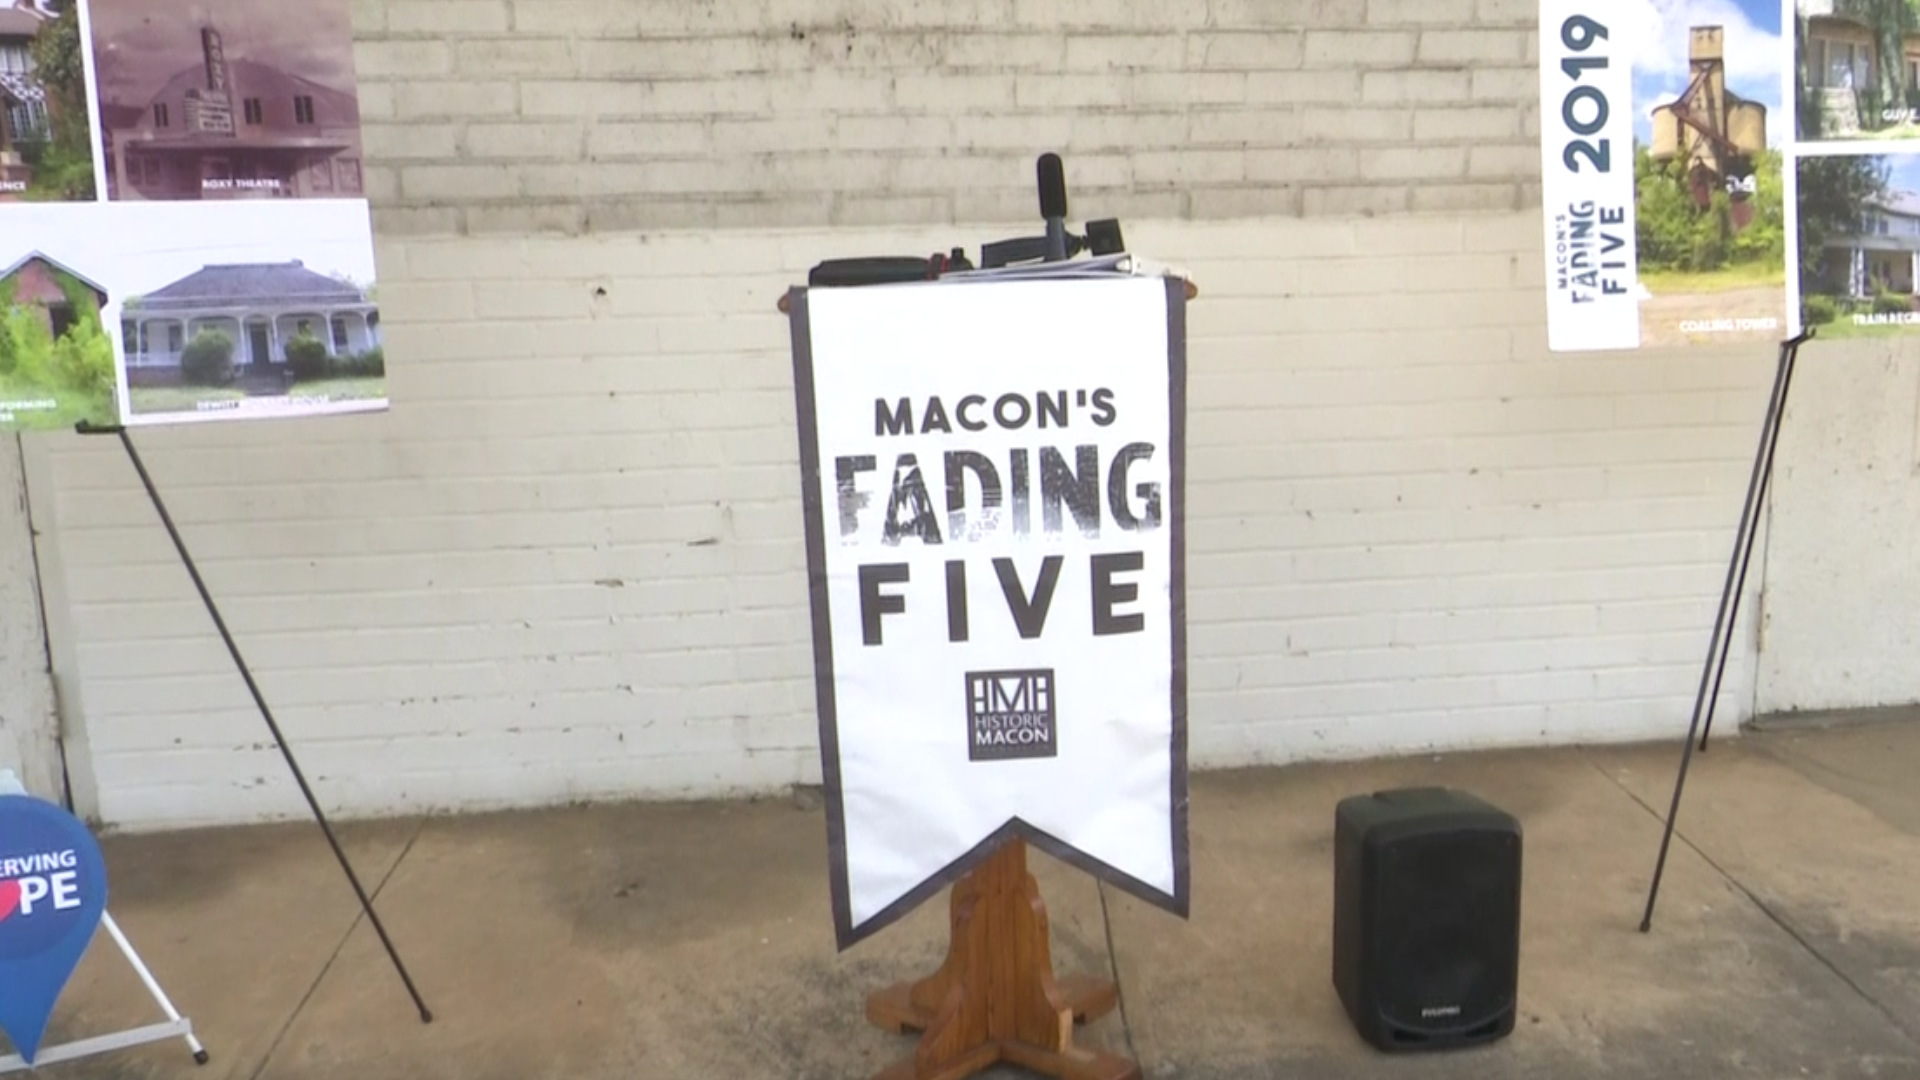 Since 2015, the Historic Macon Foundation has worked preserve historic buildings in Macon.